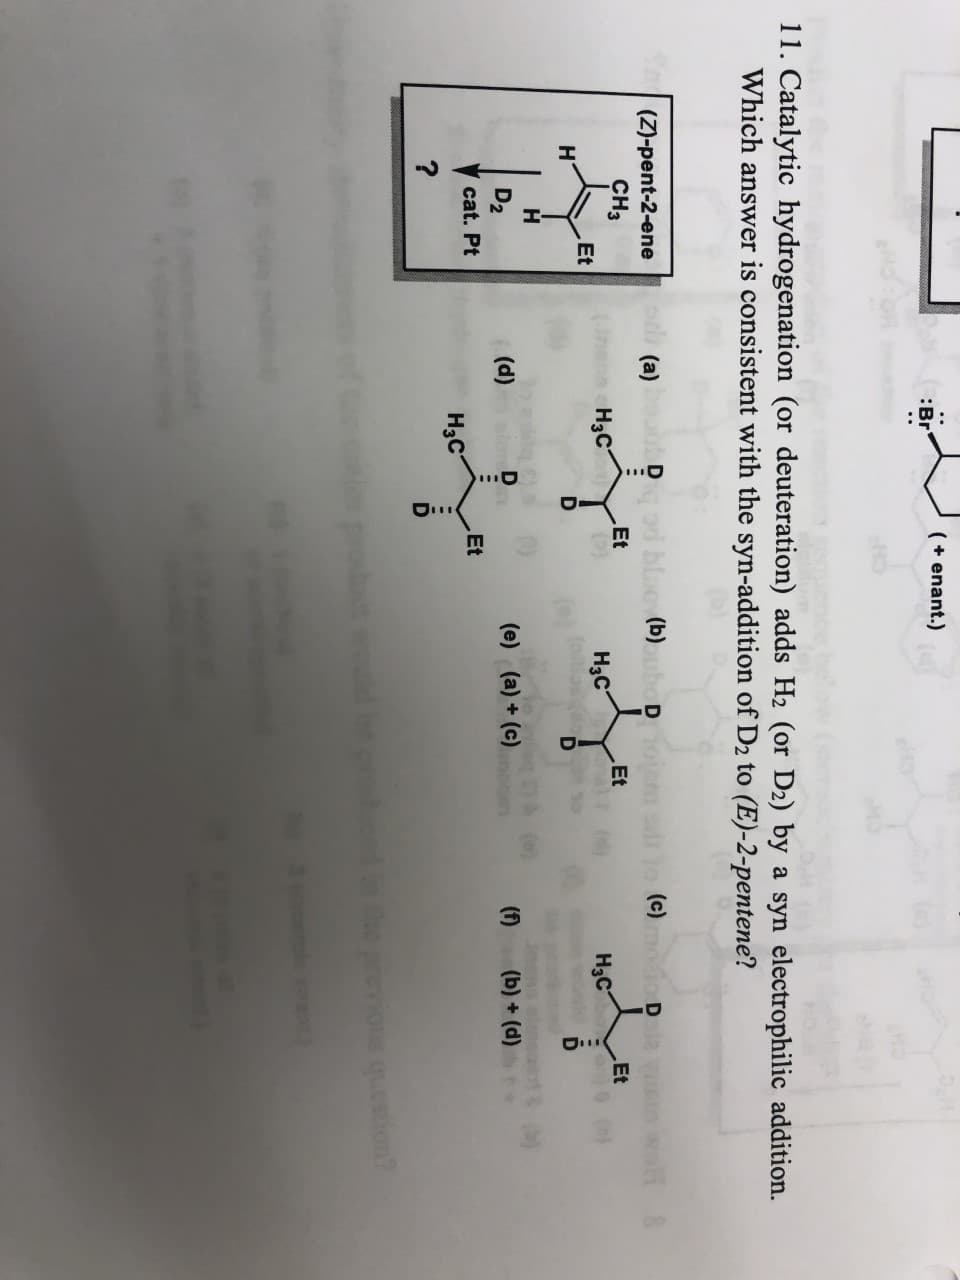 HI
(enant.)
Br
11. Catalytic hydrogenation (or deuteration) adds H2 (or D2) by a syn electrophilic addition.
Which answer is consistent with the syn-addition of D2 to (E)-2-pentene?
(Z)-pent-2-ene
(a)
Dod blao(b)oubo Doi
(c)
D 2 VI
wo
CHз
Et
Et
Et
Нас
Нас
Hас
Et
н
D
D2
(d)
(e) (a)+ (e)
(f)
(b)+(d)
cat. Pt
Et
Hас
?
Che previons question
